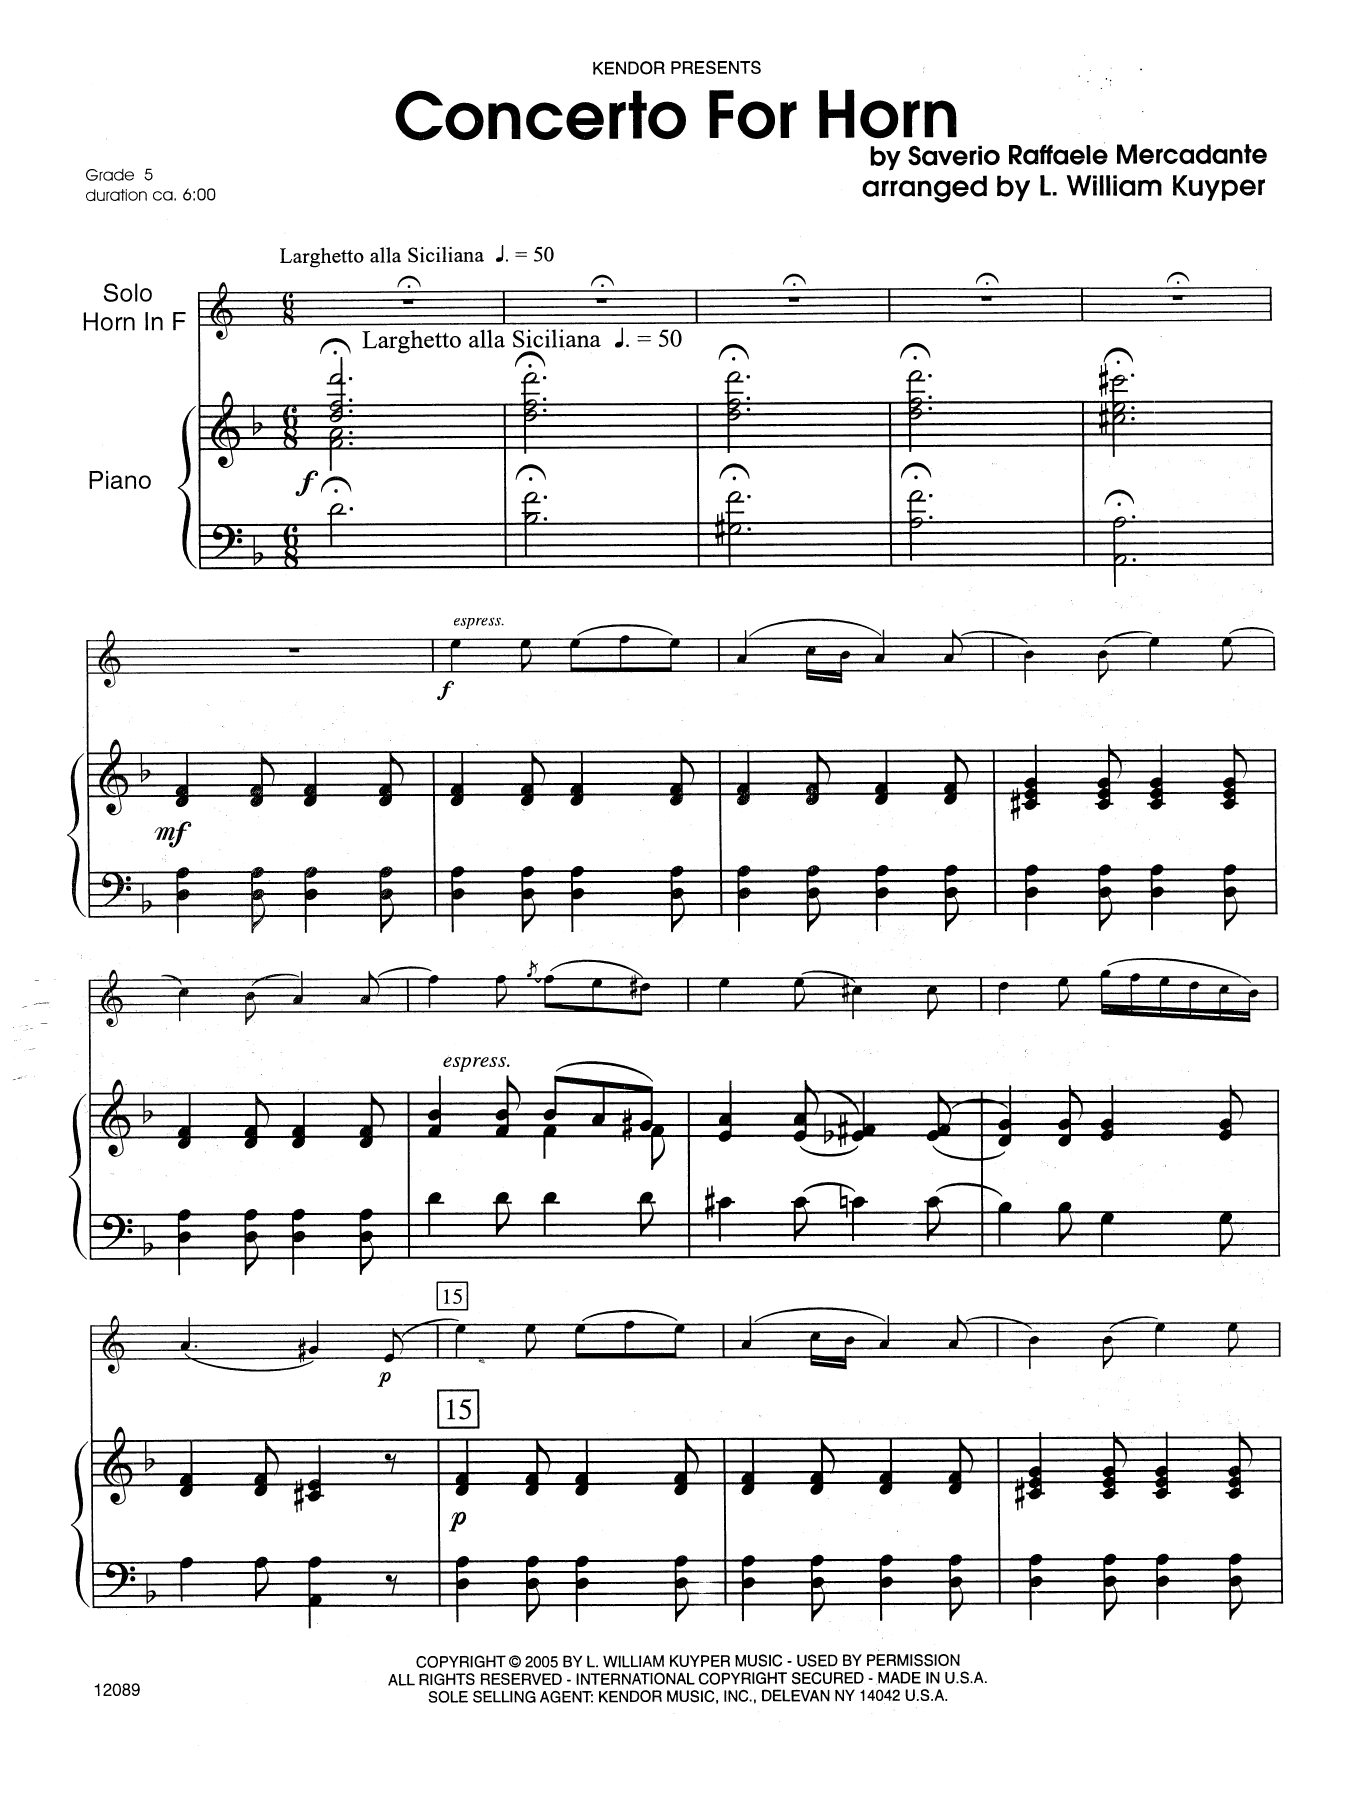 Download William Kuyper Concerto For Horn - Piano Sheet Music